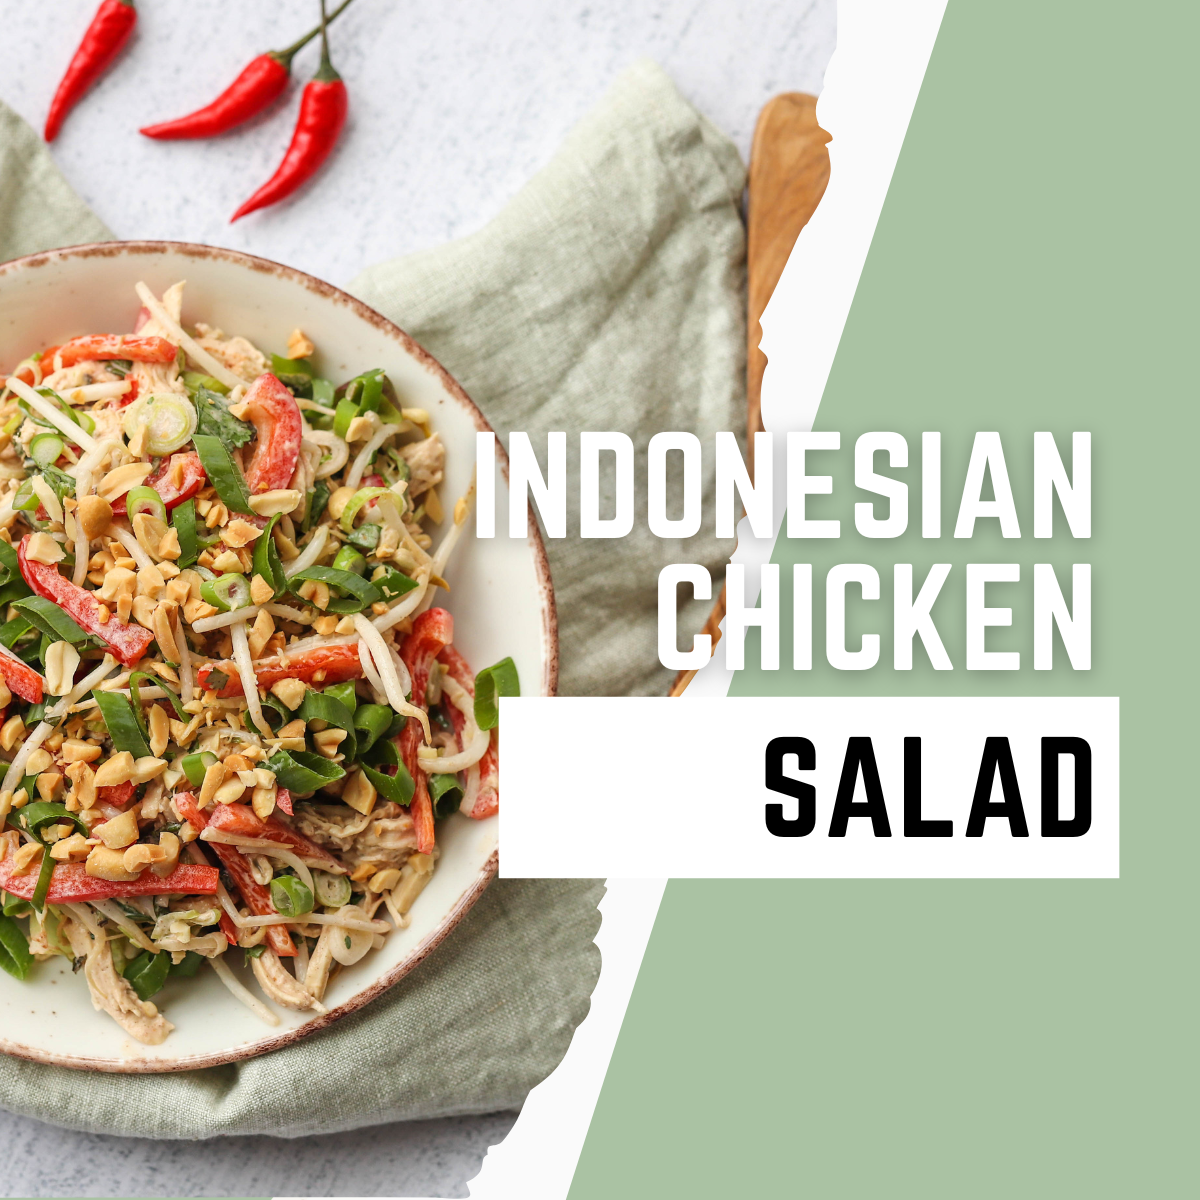 a beautifully arranged bowl of Indonesian Chicken Salad, with colourful strips of red bell pepper, fresh mung bean sprouts, and fragrant herbs like cilantro and mint. The salad would be topped with chopped roasted peanuts and drizzled with the zesty dress